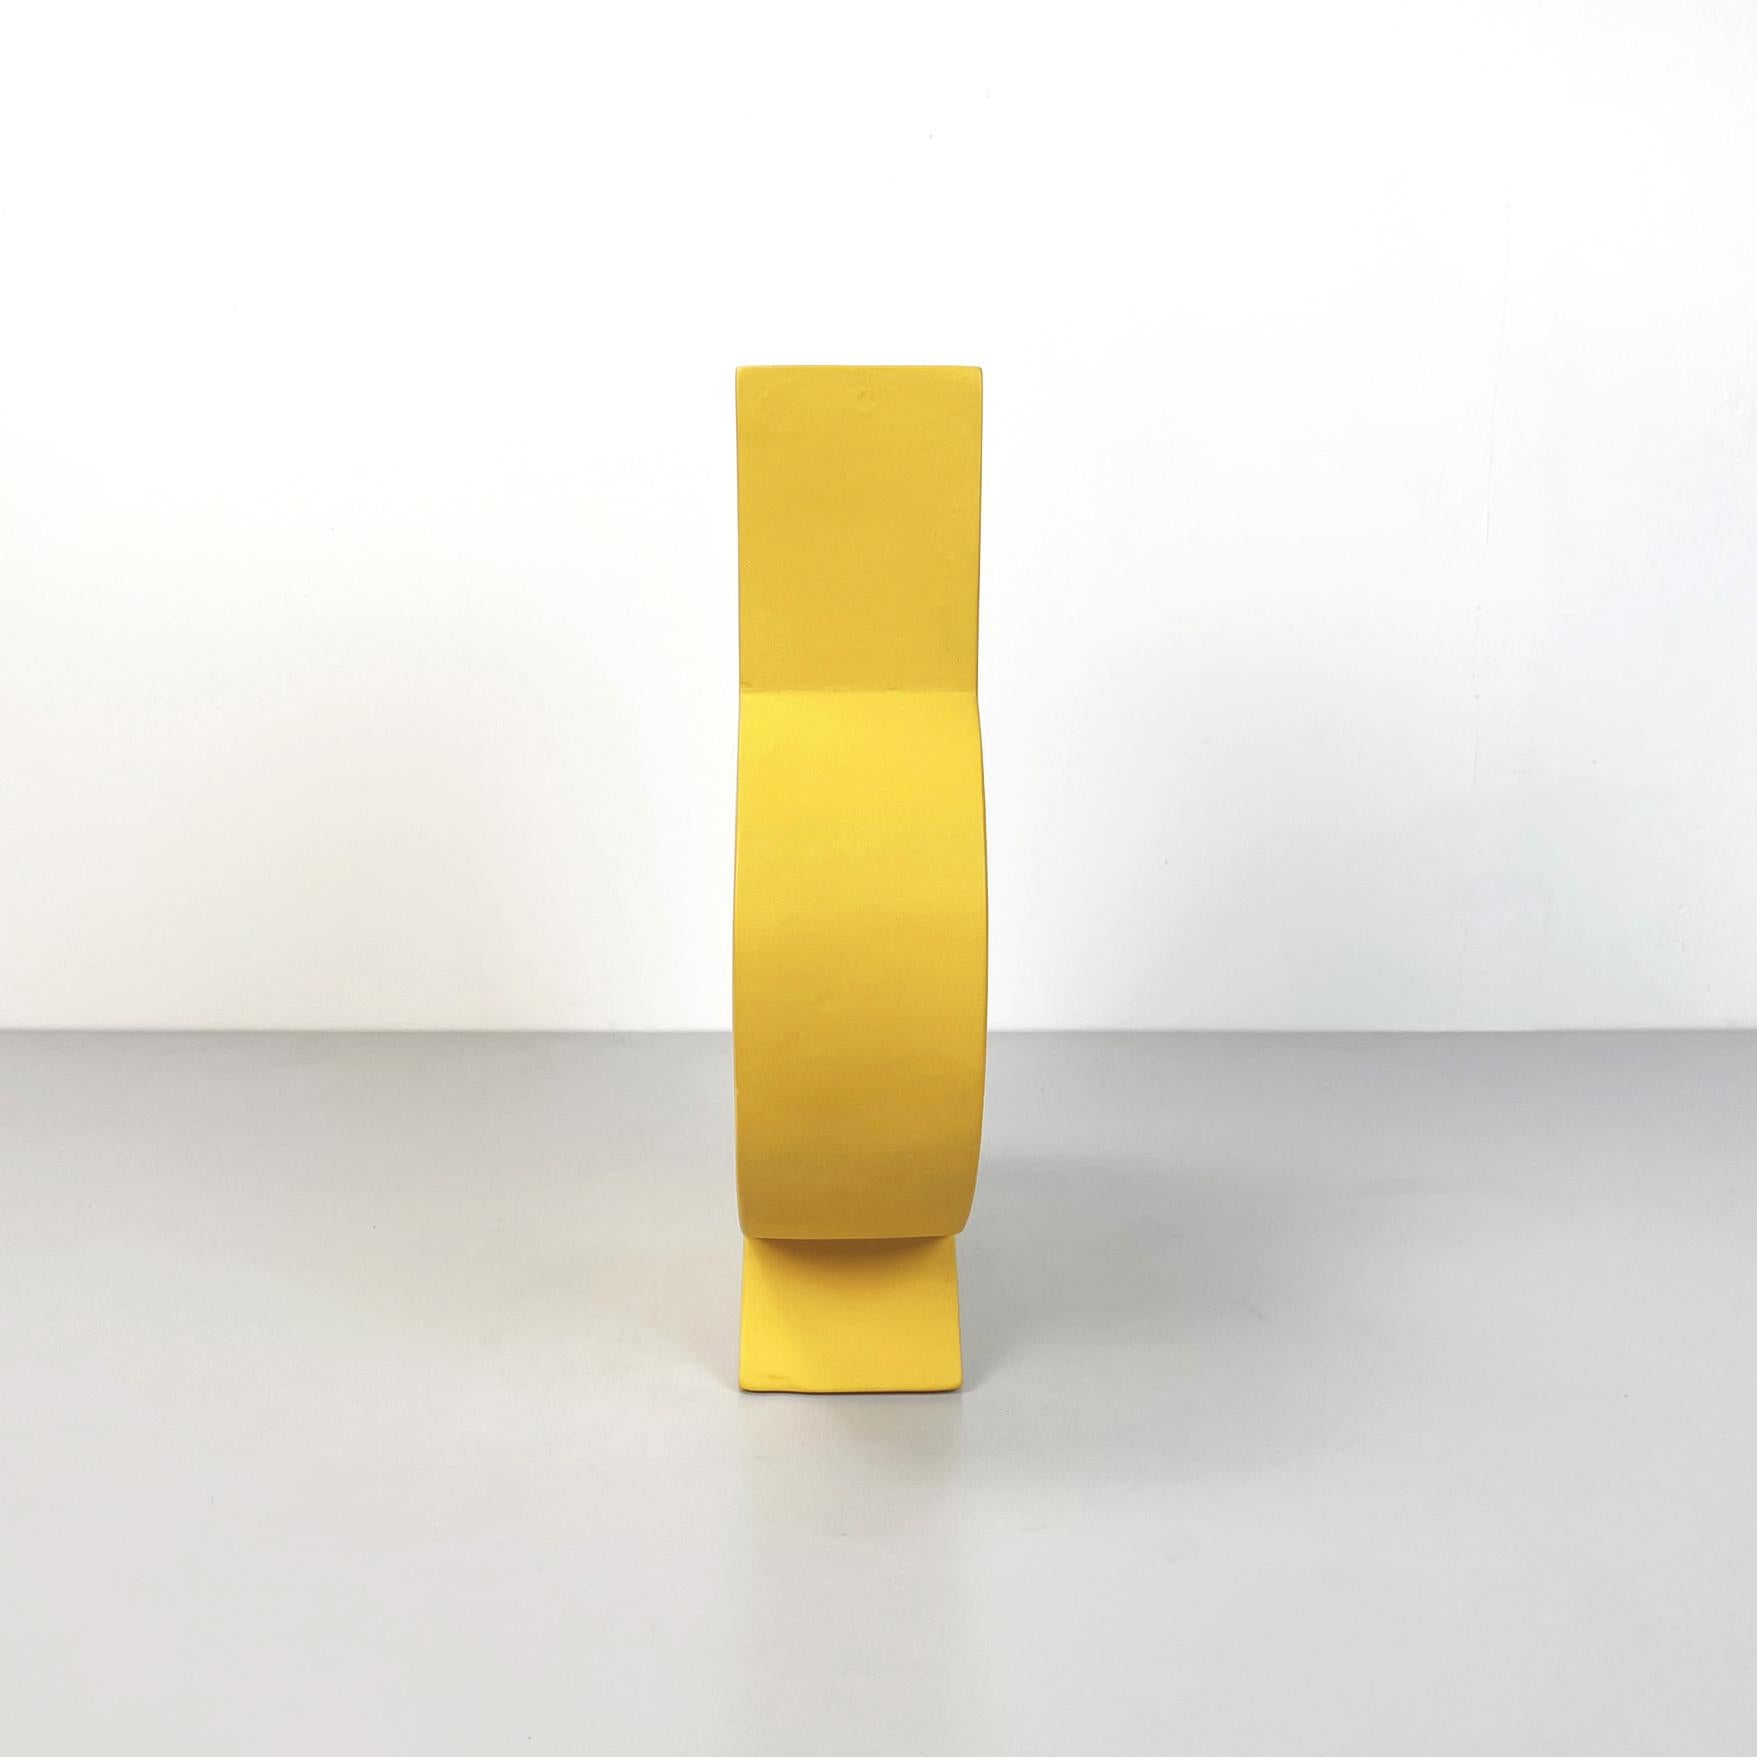 Post-Modern Italian Postmodern Yellow Ceramic Sculpture by Florio Pac Paccagnella, 2023